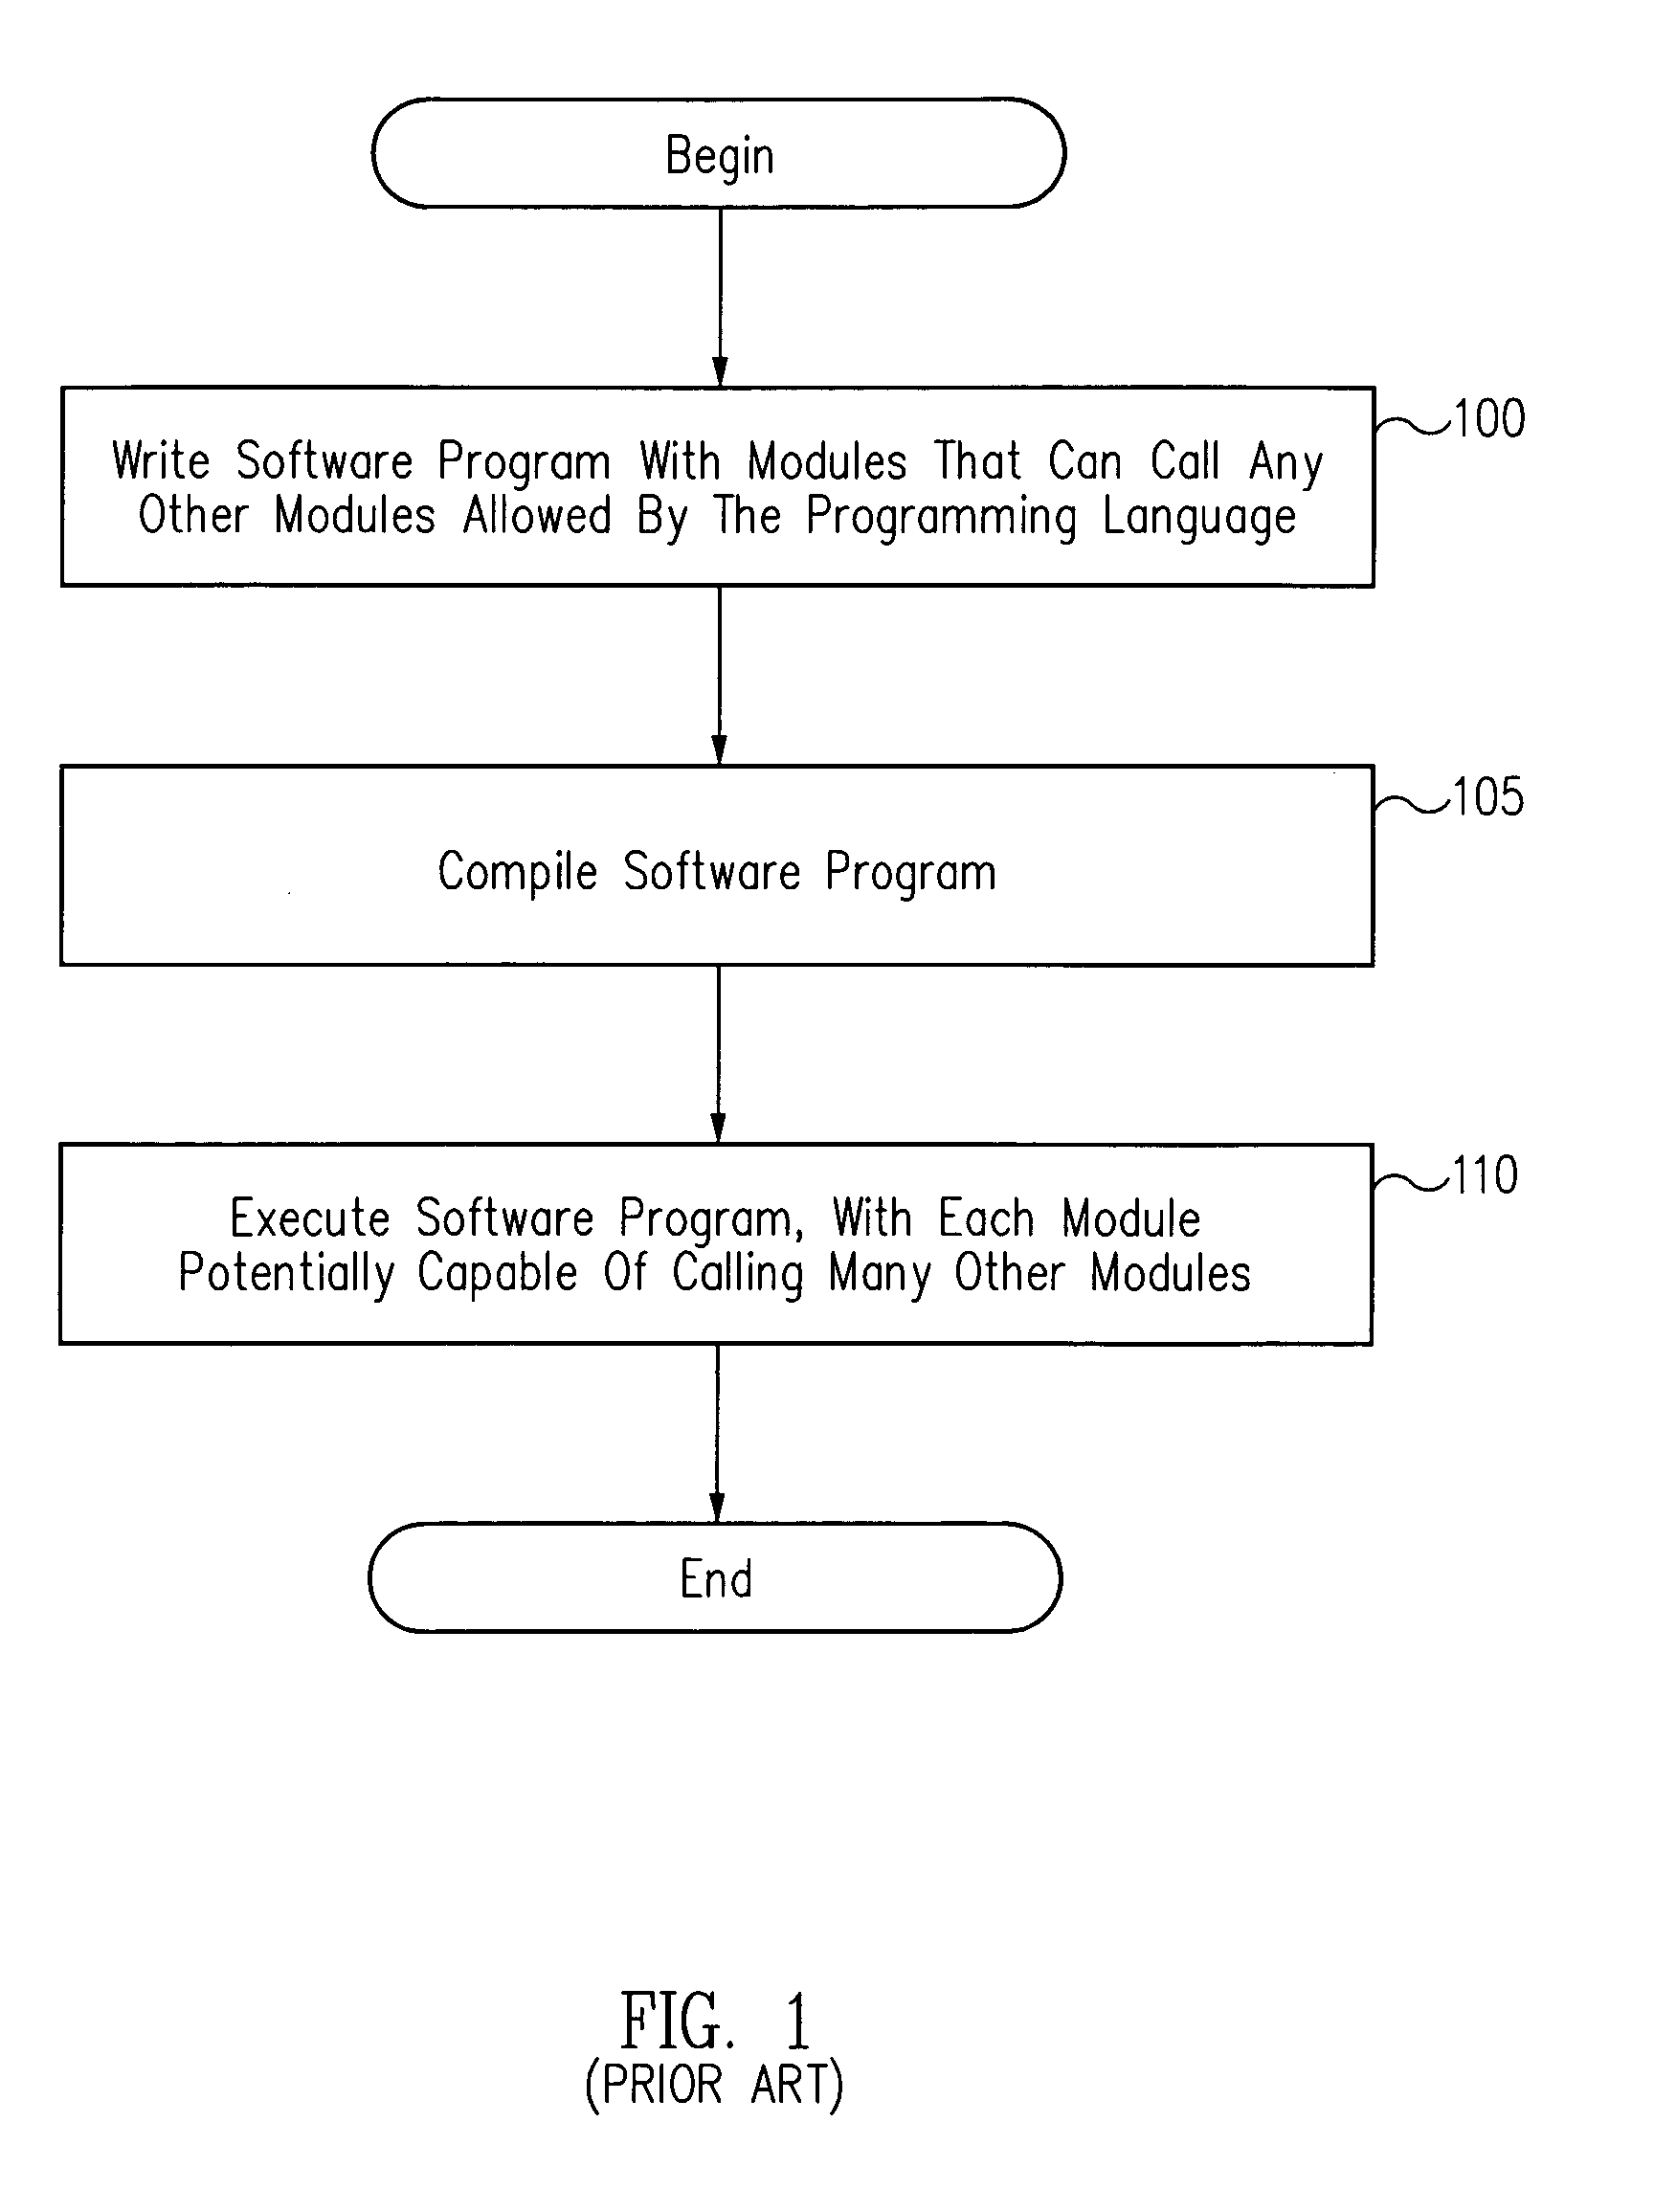 Method and apparatus for deployment of high integrity software using initialization order and calling order constraints